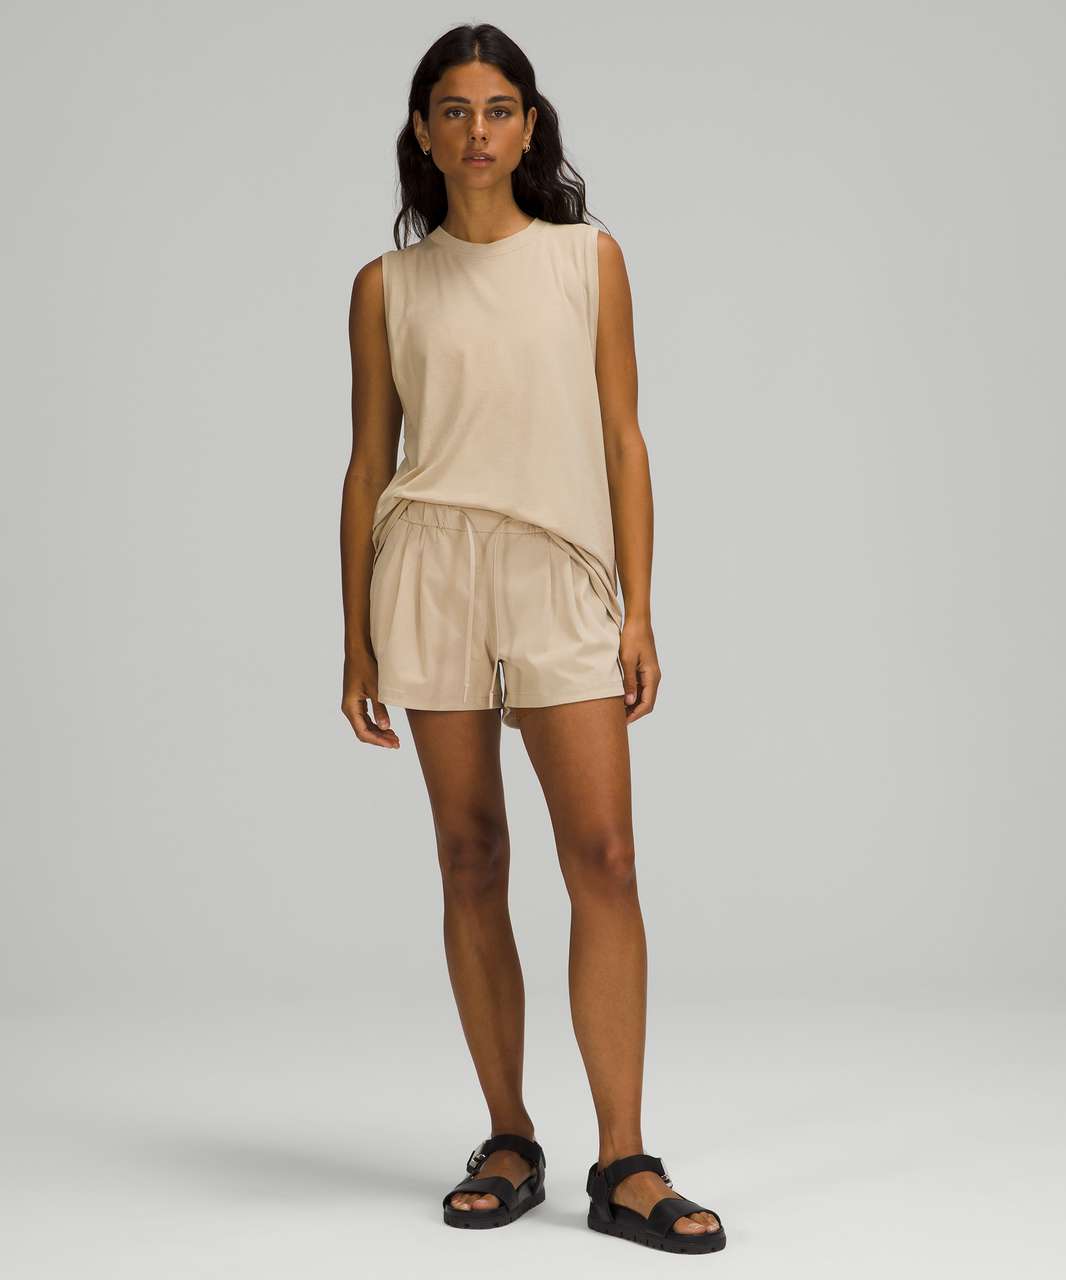 Lululemon All Yours Tank Top - Trench